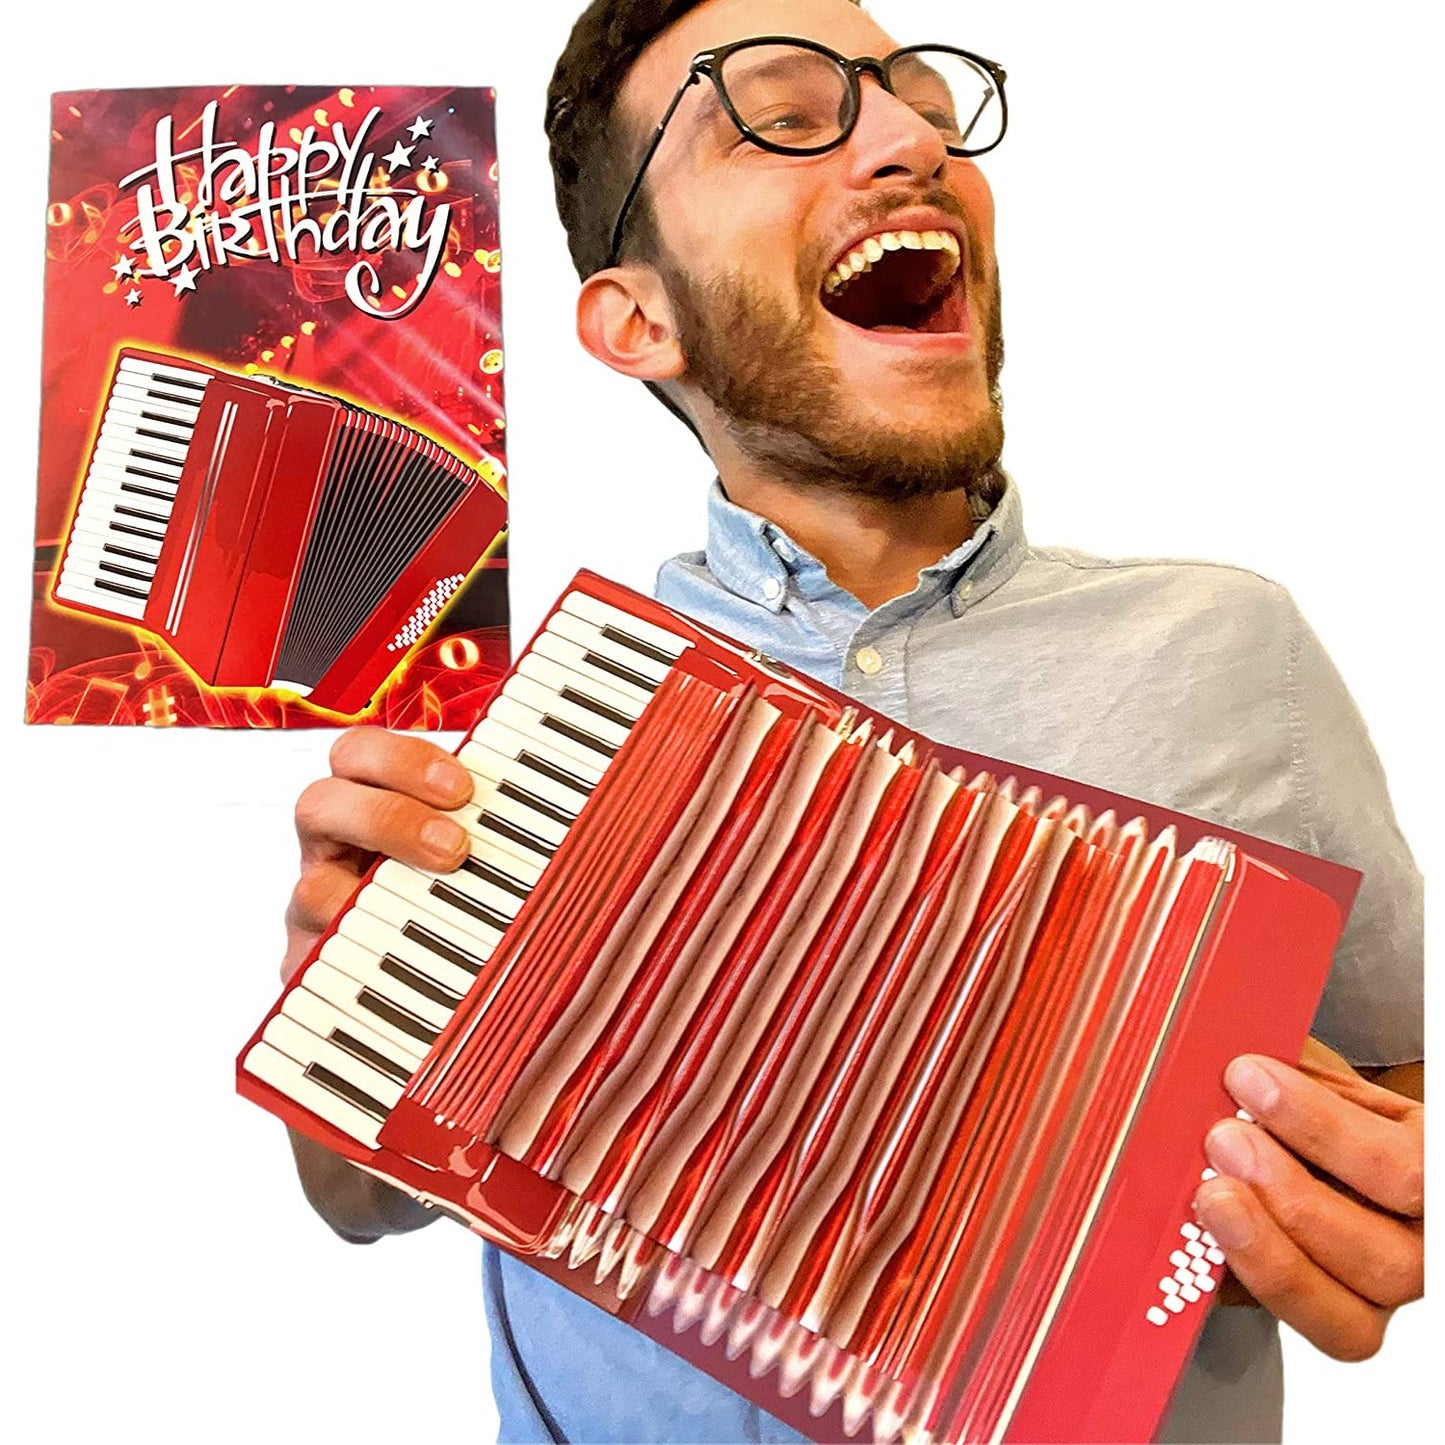 A man is smiling and holding an accordion shaped birthday card.